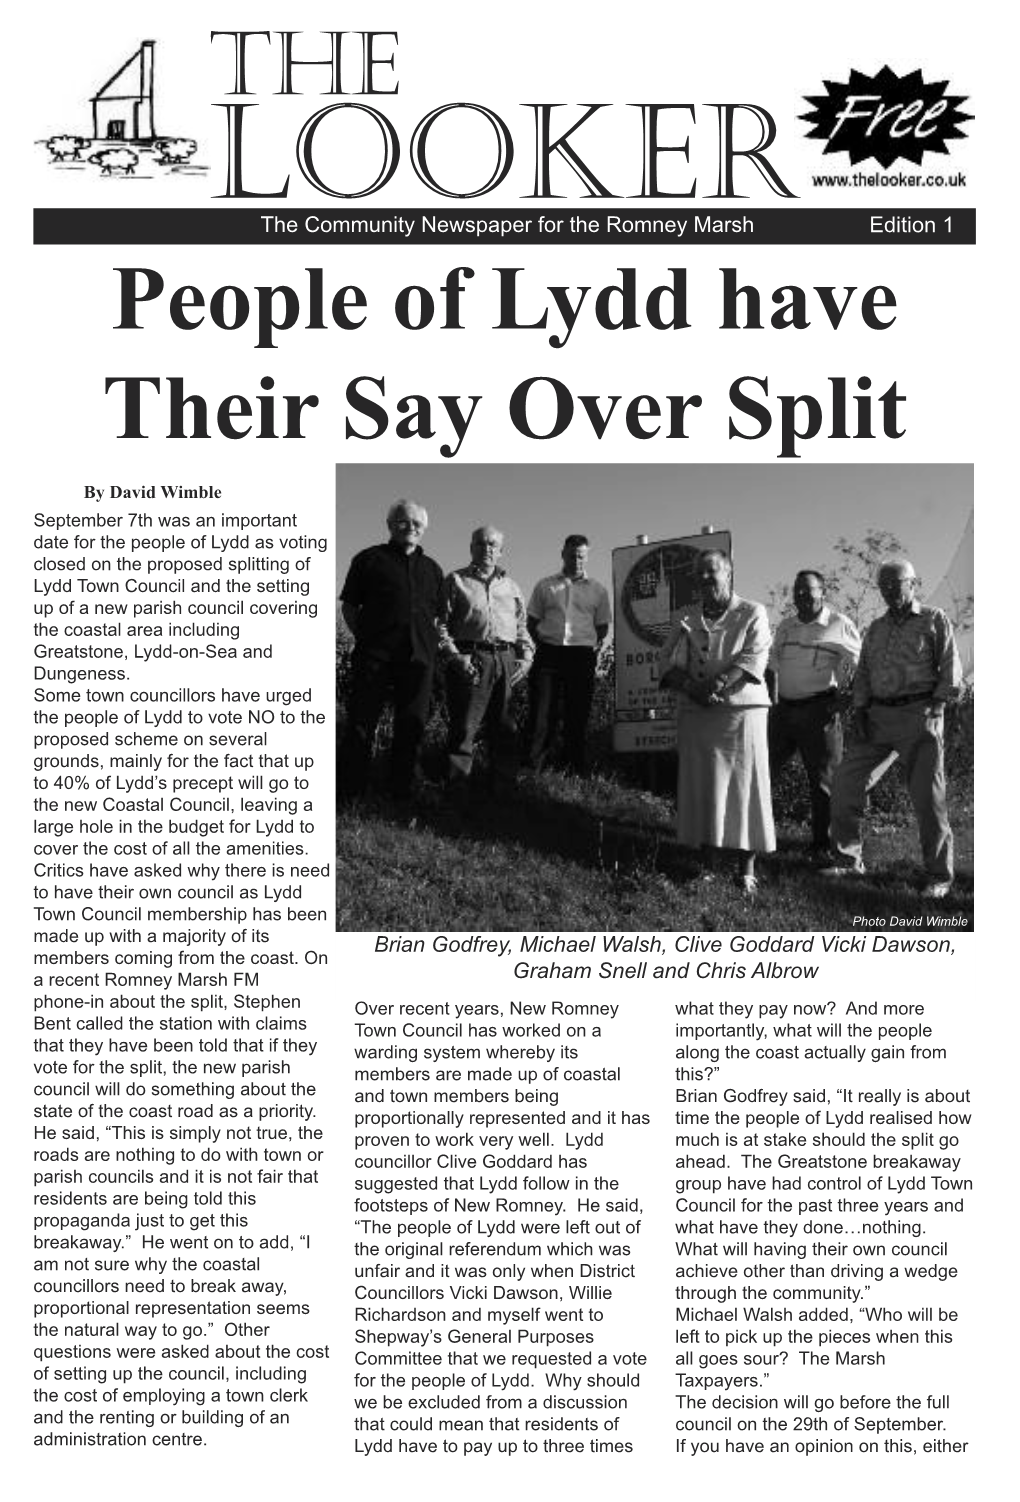 People of Lydd Have Their Say Over Split